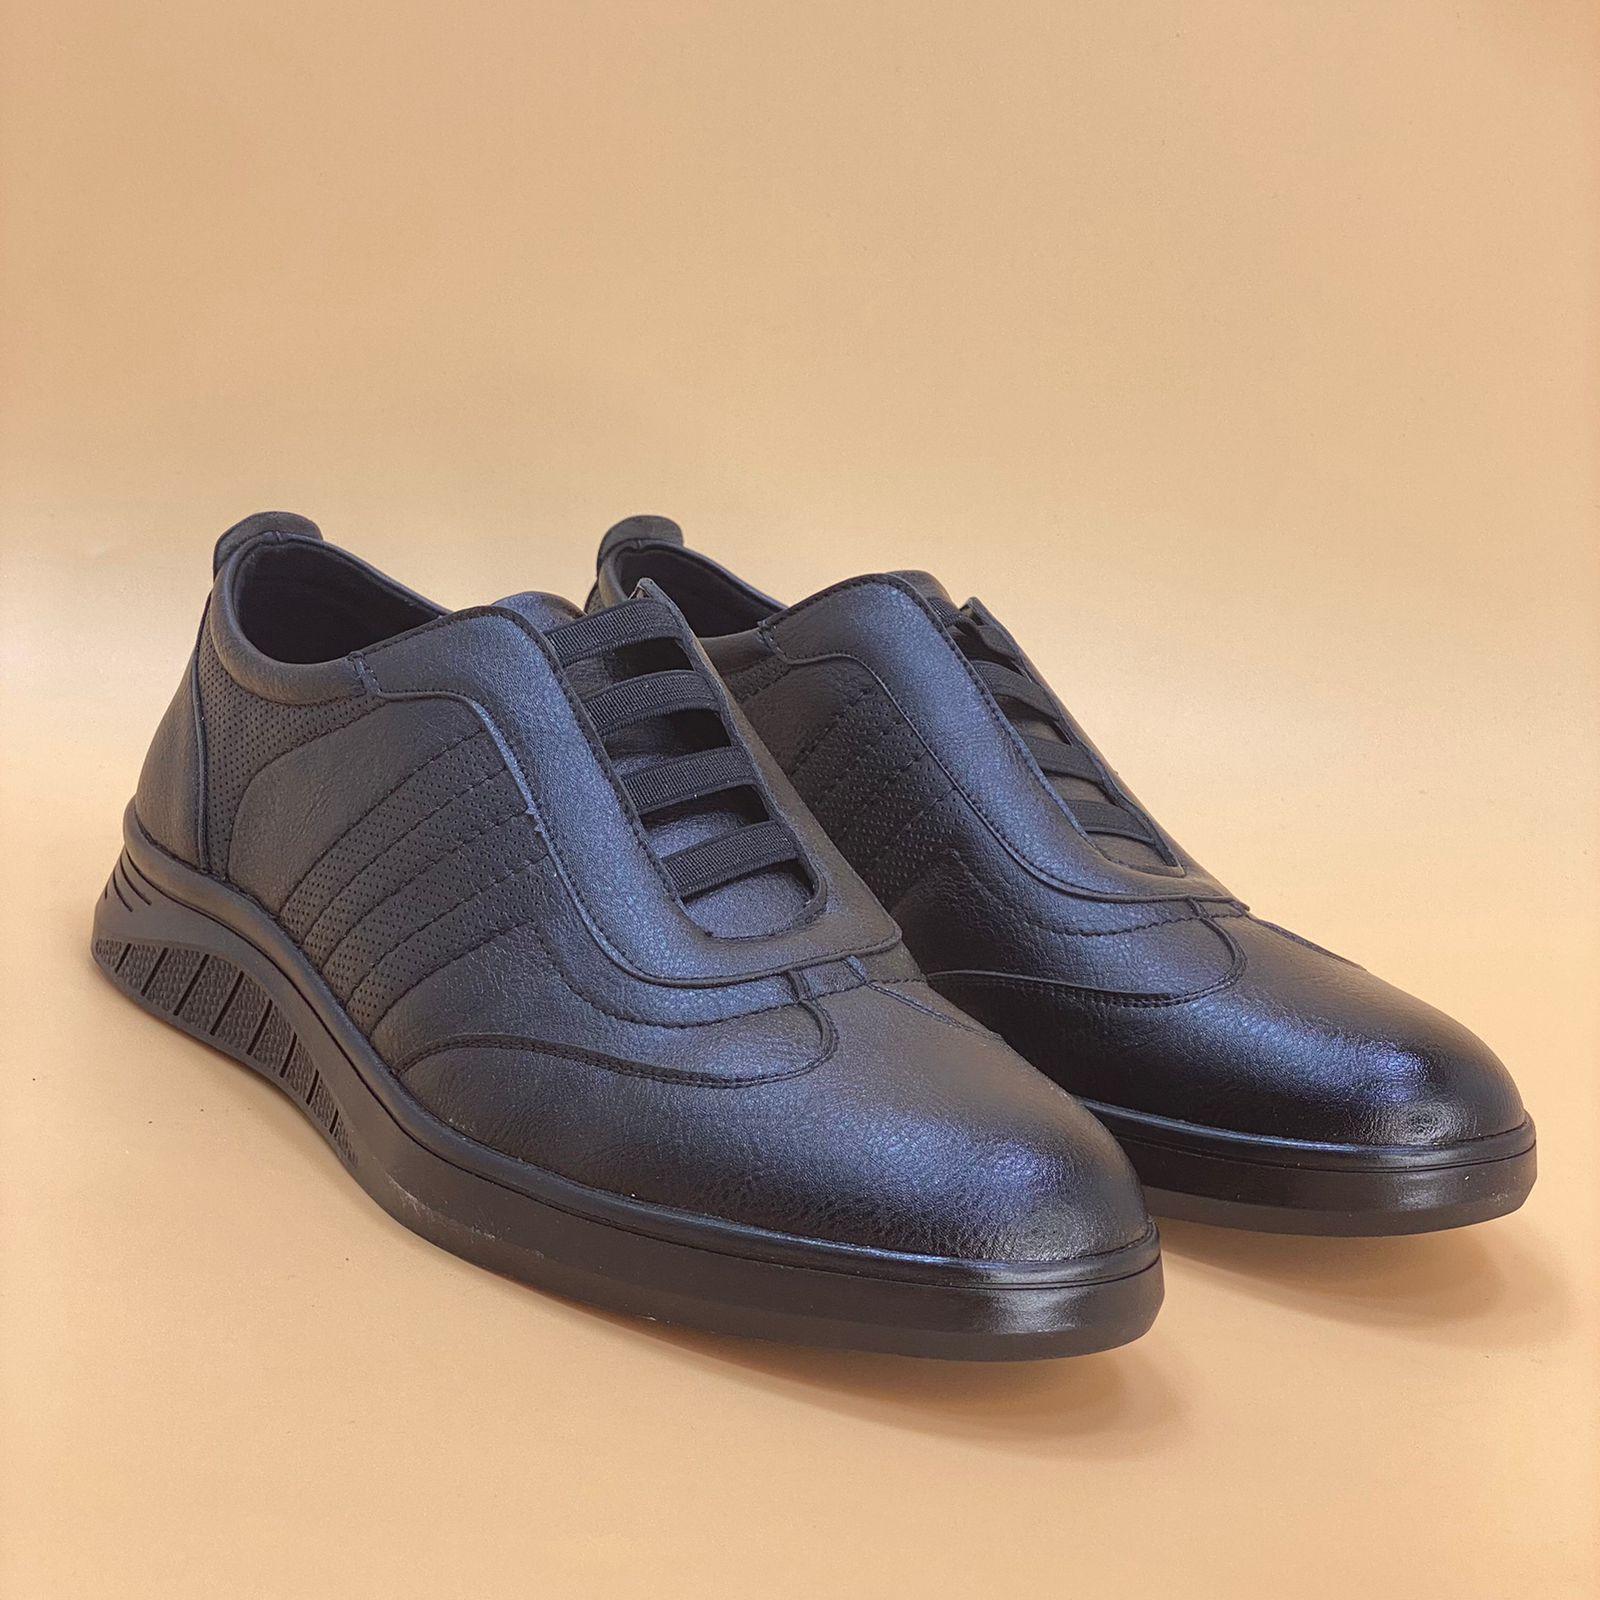 MEN SHOES  M129 , MADE IN CHINA - Olive Tree Shoes 